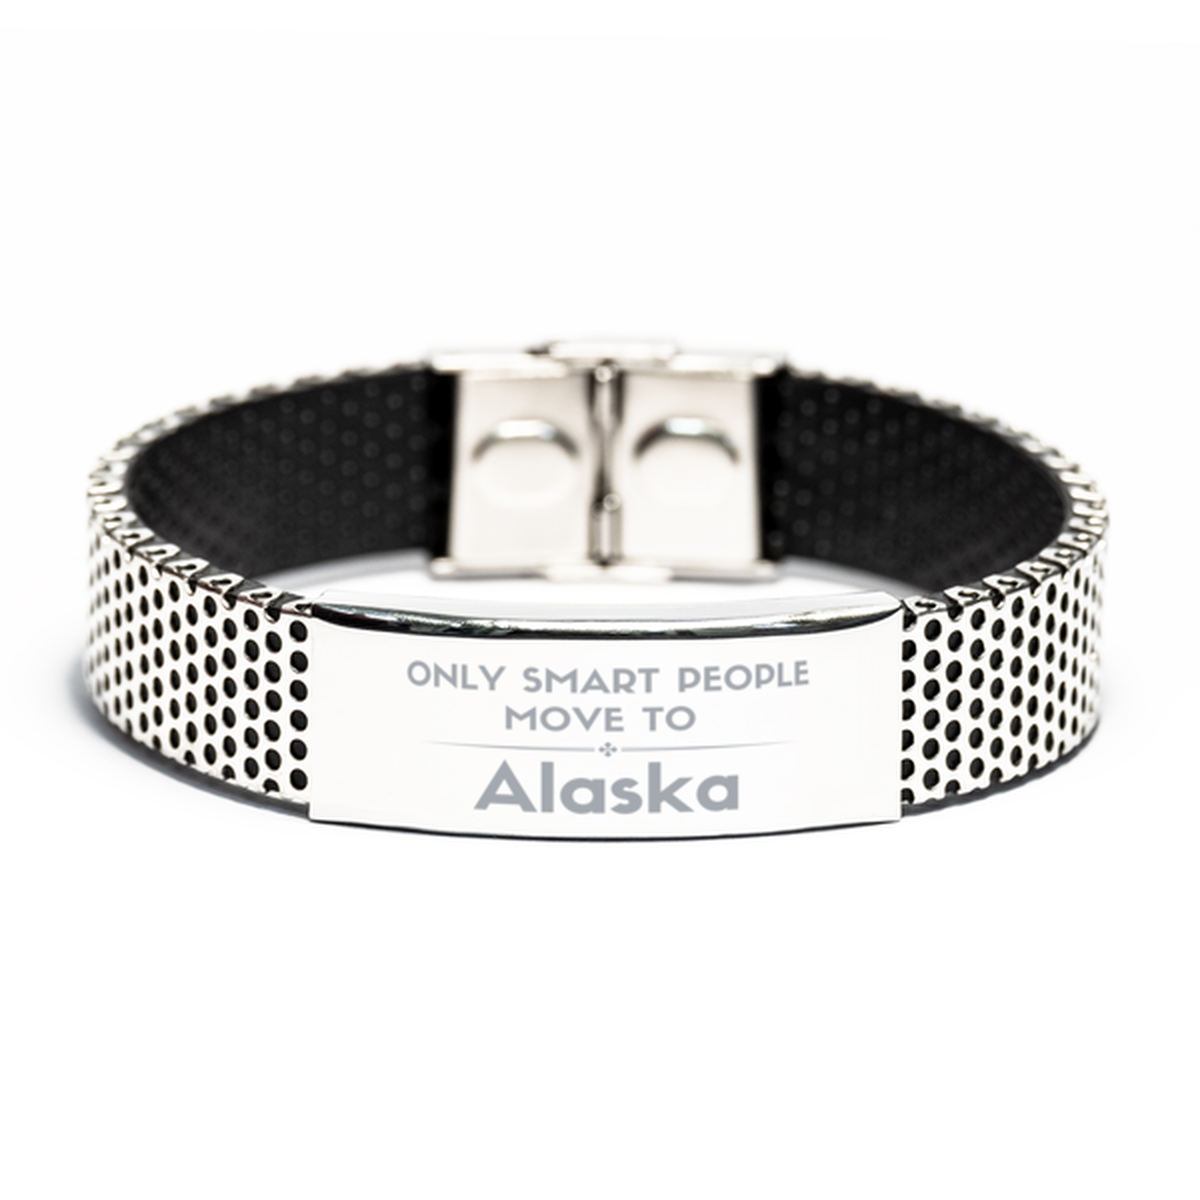 Only smart people move to Alaska Stainless Steel Bracelet, Gag Gifts For Alaska, Move to Alaska Gifts for Friends Coworker Funny Saying Quote